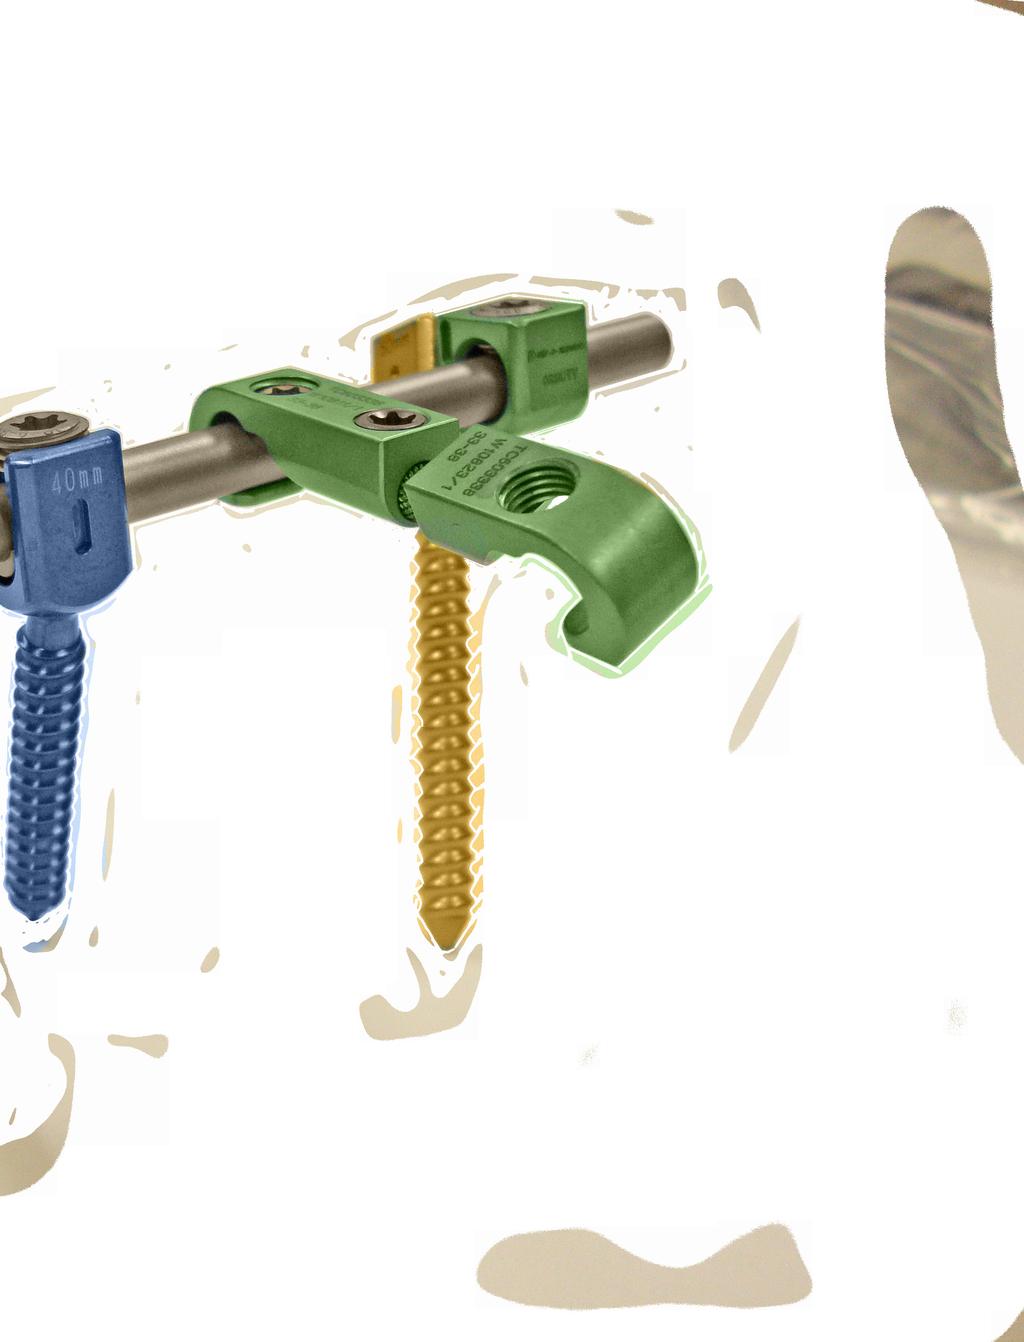 Rod/Screw Connectors Advanced Hexalobular Torx Locking System Prevent plug pop-out Eliminate chance of cross threading Secure closure with minimal torque Allow rods to be attached without